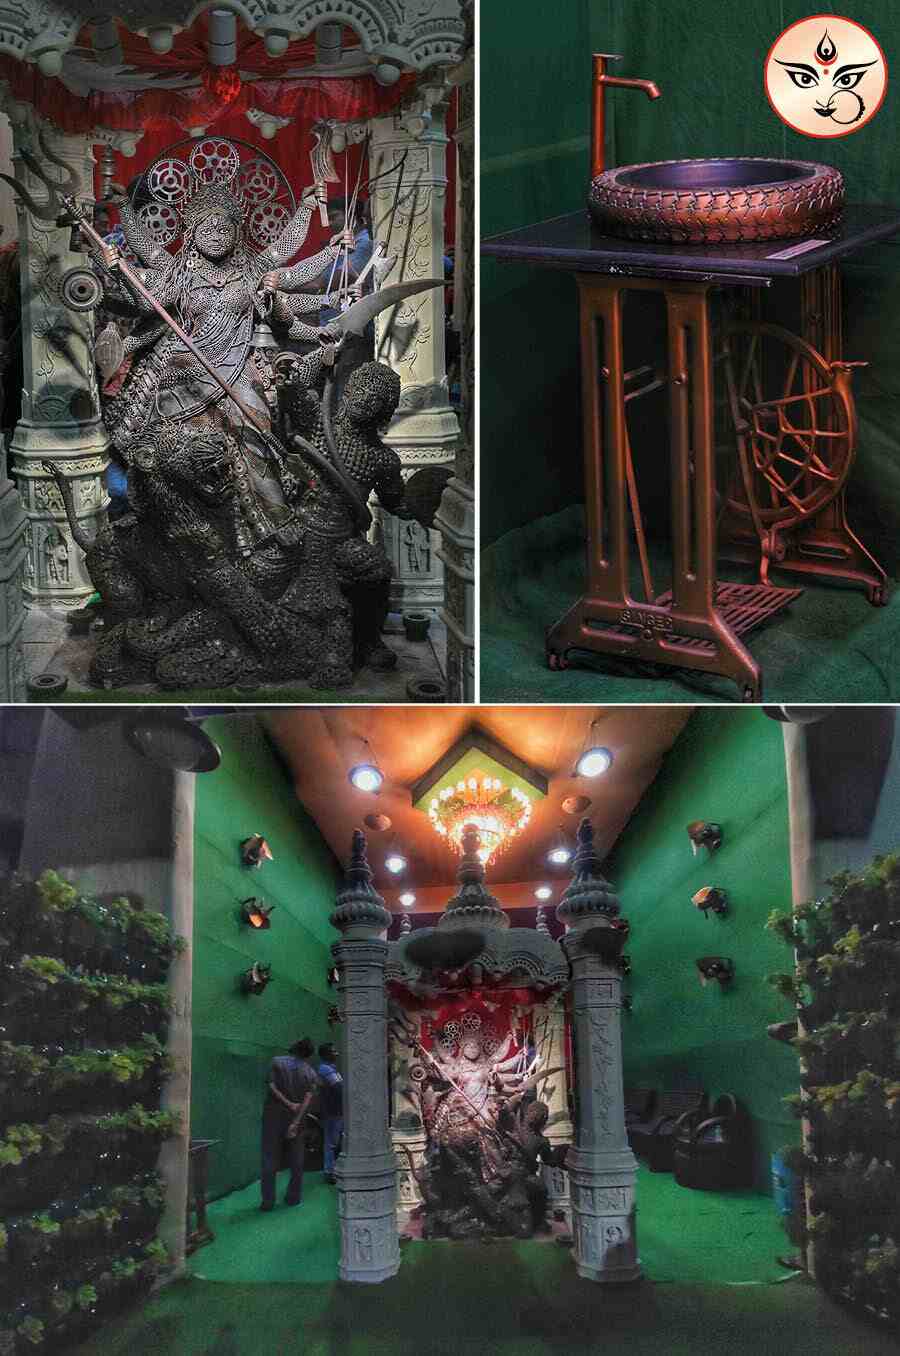 The Maitri Sangha on Motilal Nehru Road between Tridhara and Maddox Square has re-used metal scraps to create an exquisite Durga idol and pandal, under the guidance of Pradip Chopra, chairman, iLead Kolkata, this year. Artist Afsar Ali has evoked the deep sense of nostalgia by bringing back Maitri Sangha’s Durga Puja also on a mission to empower unemployed youth through the ‘Waste Billionaire’ initiative. It is an idea to encourage entrepreneurship amongst unemployed youth based on waste upcycling